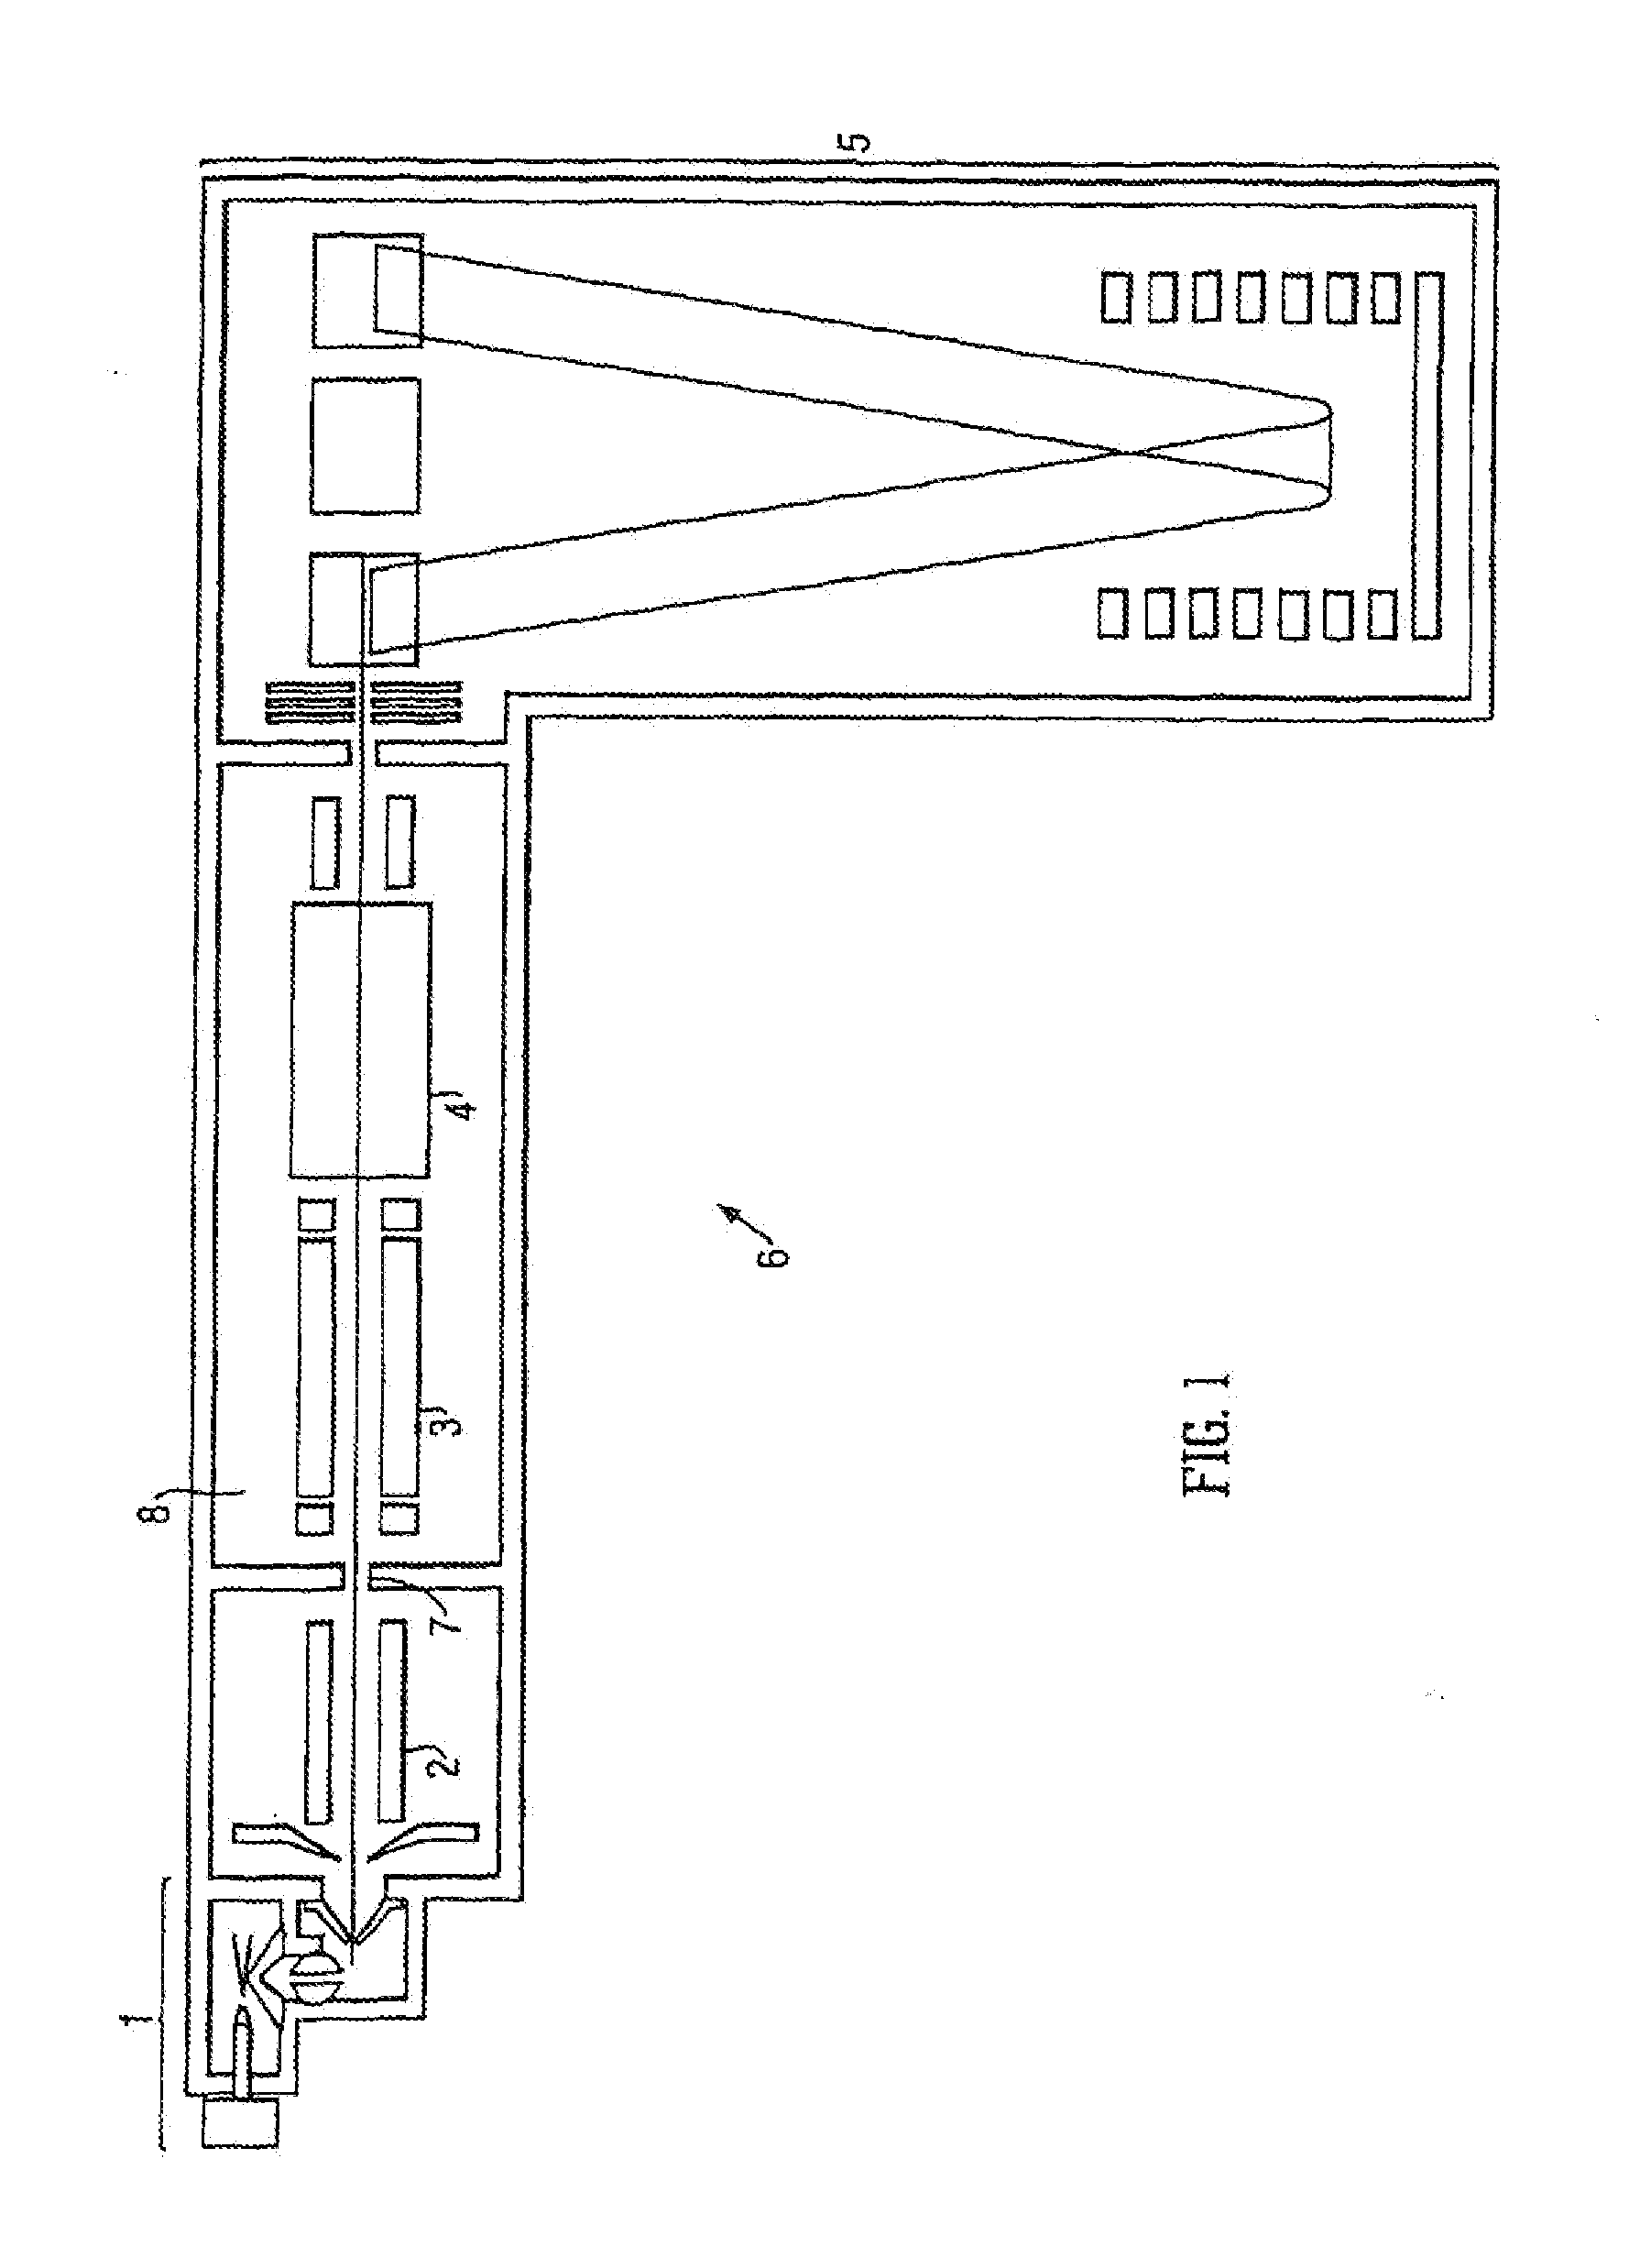 Method of Screening a Sample for the Presence of One or More Known Compounds of Interest and a Mass Spectrometer Performing this Method